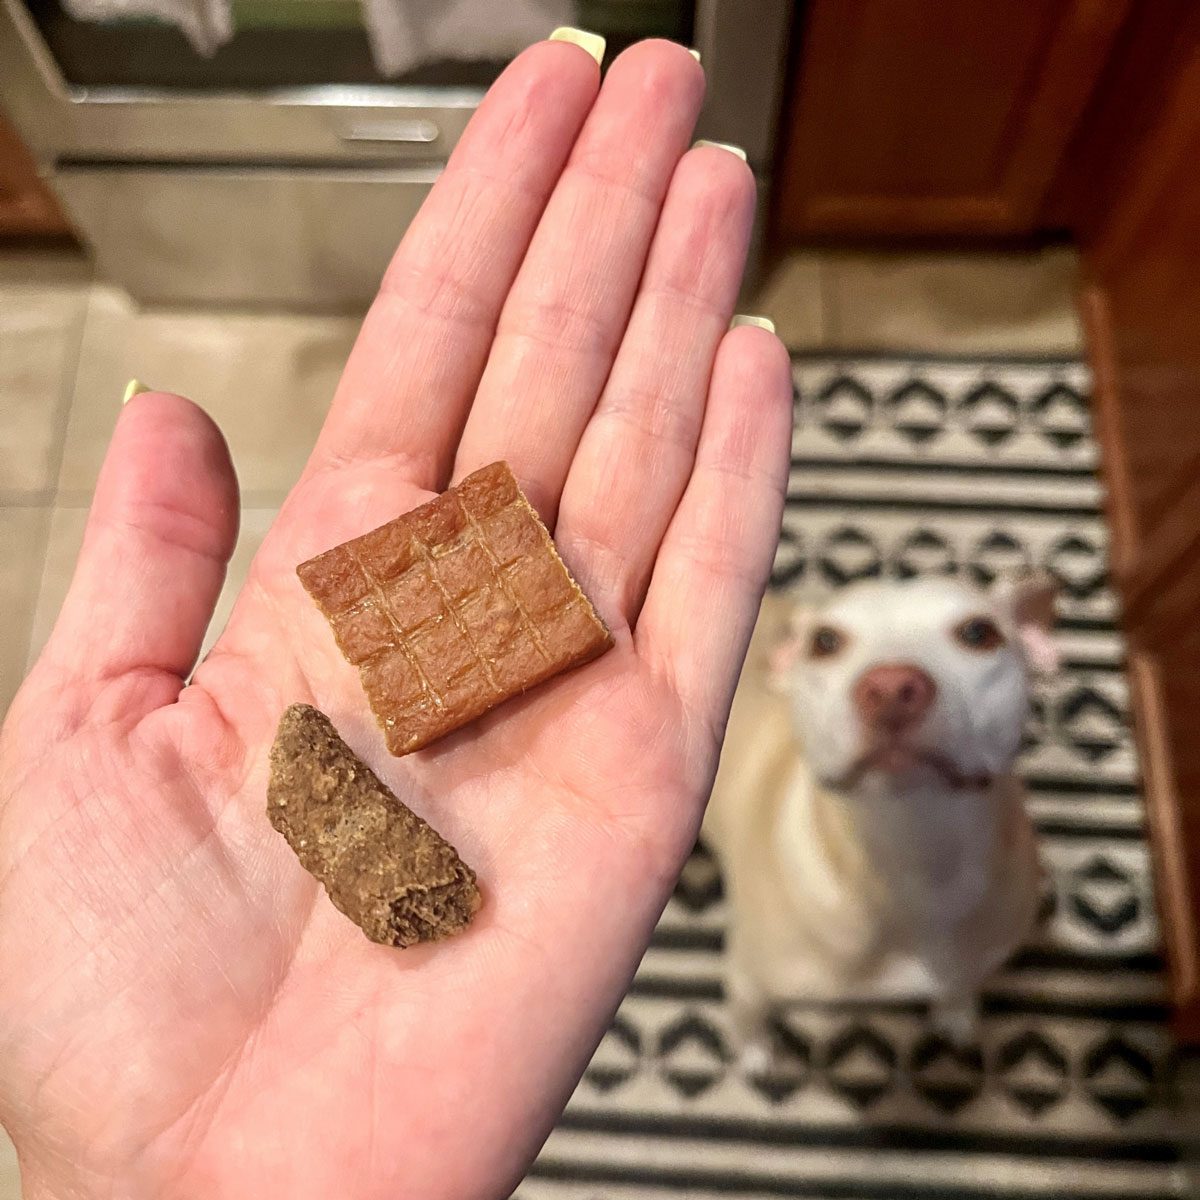 Dog Treat in Hand and Dog Sitting on Rug